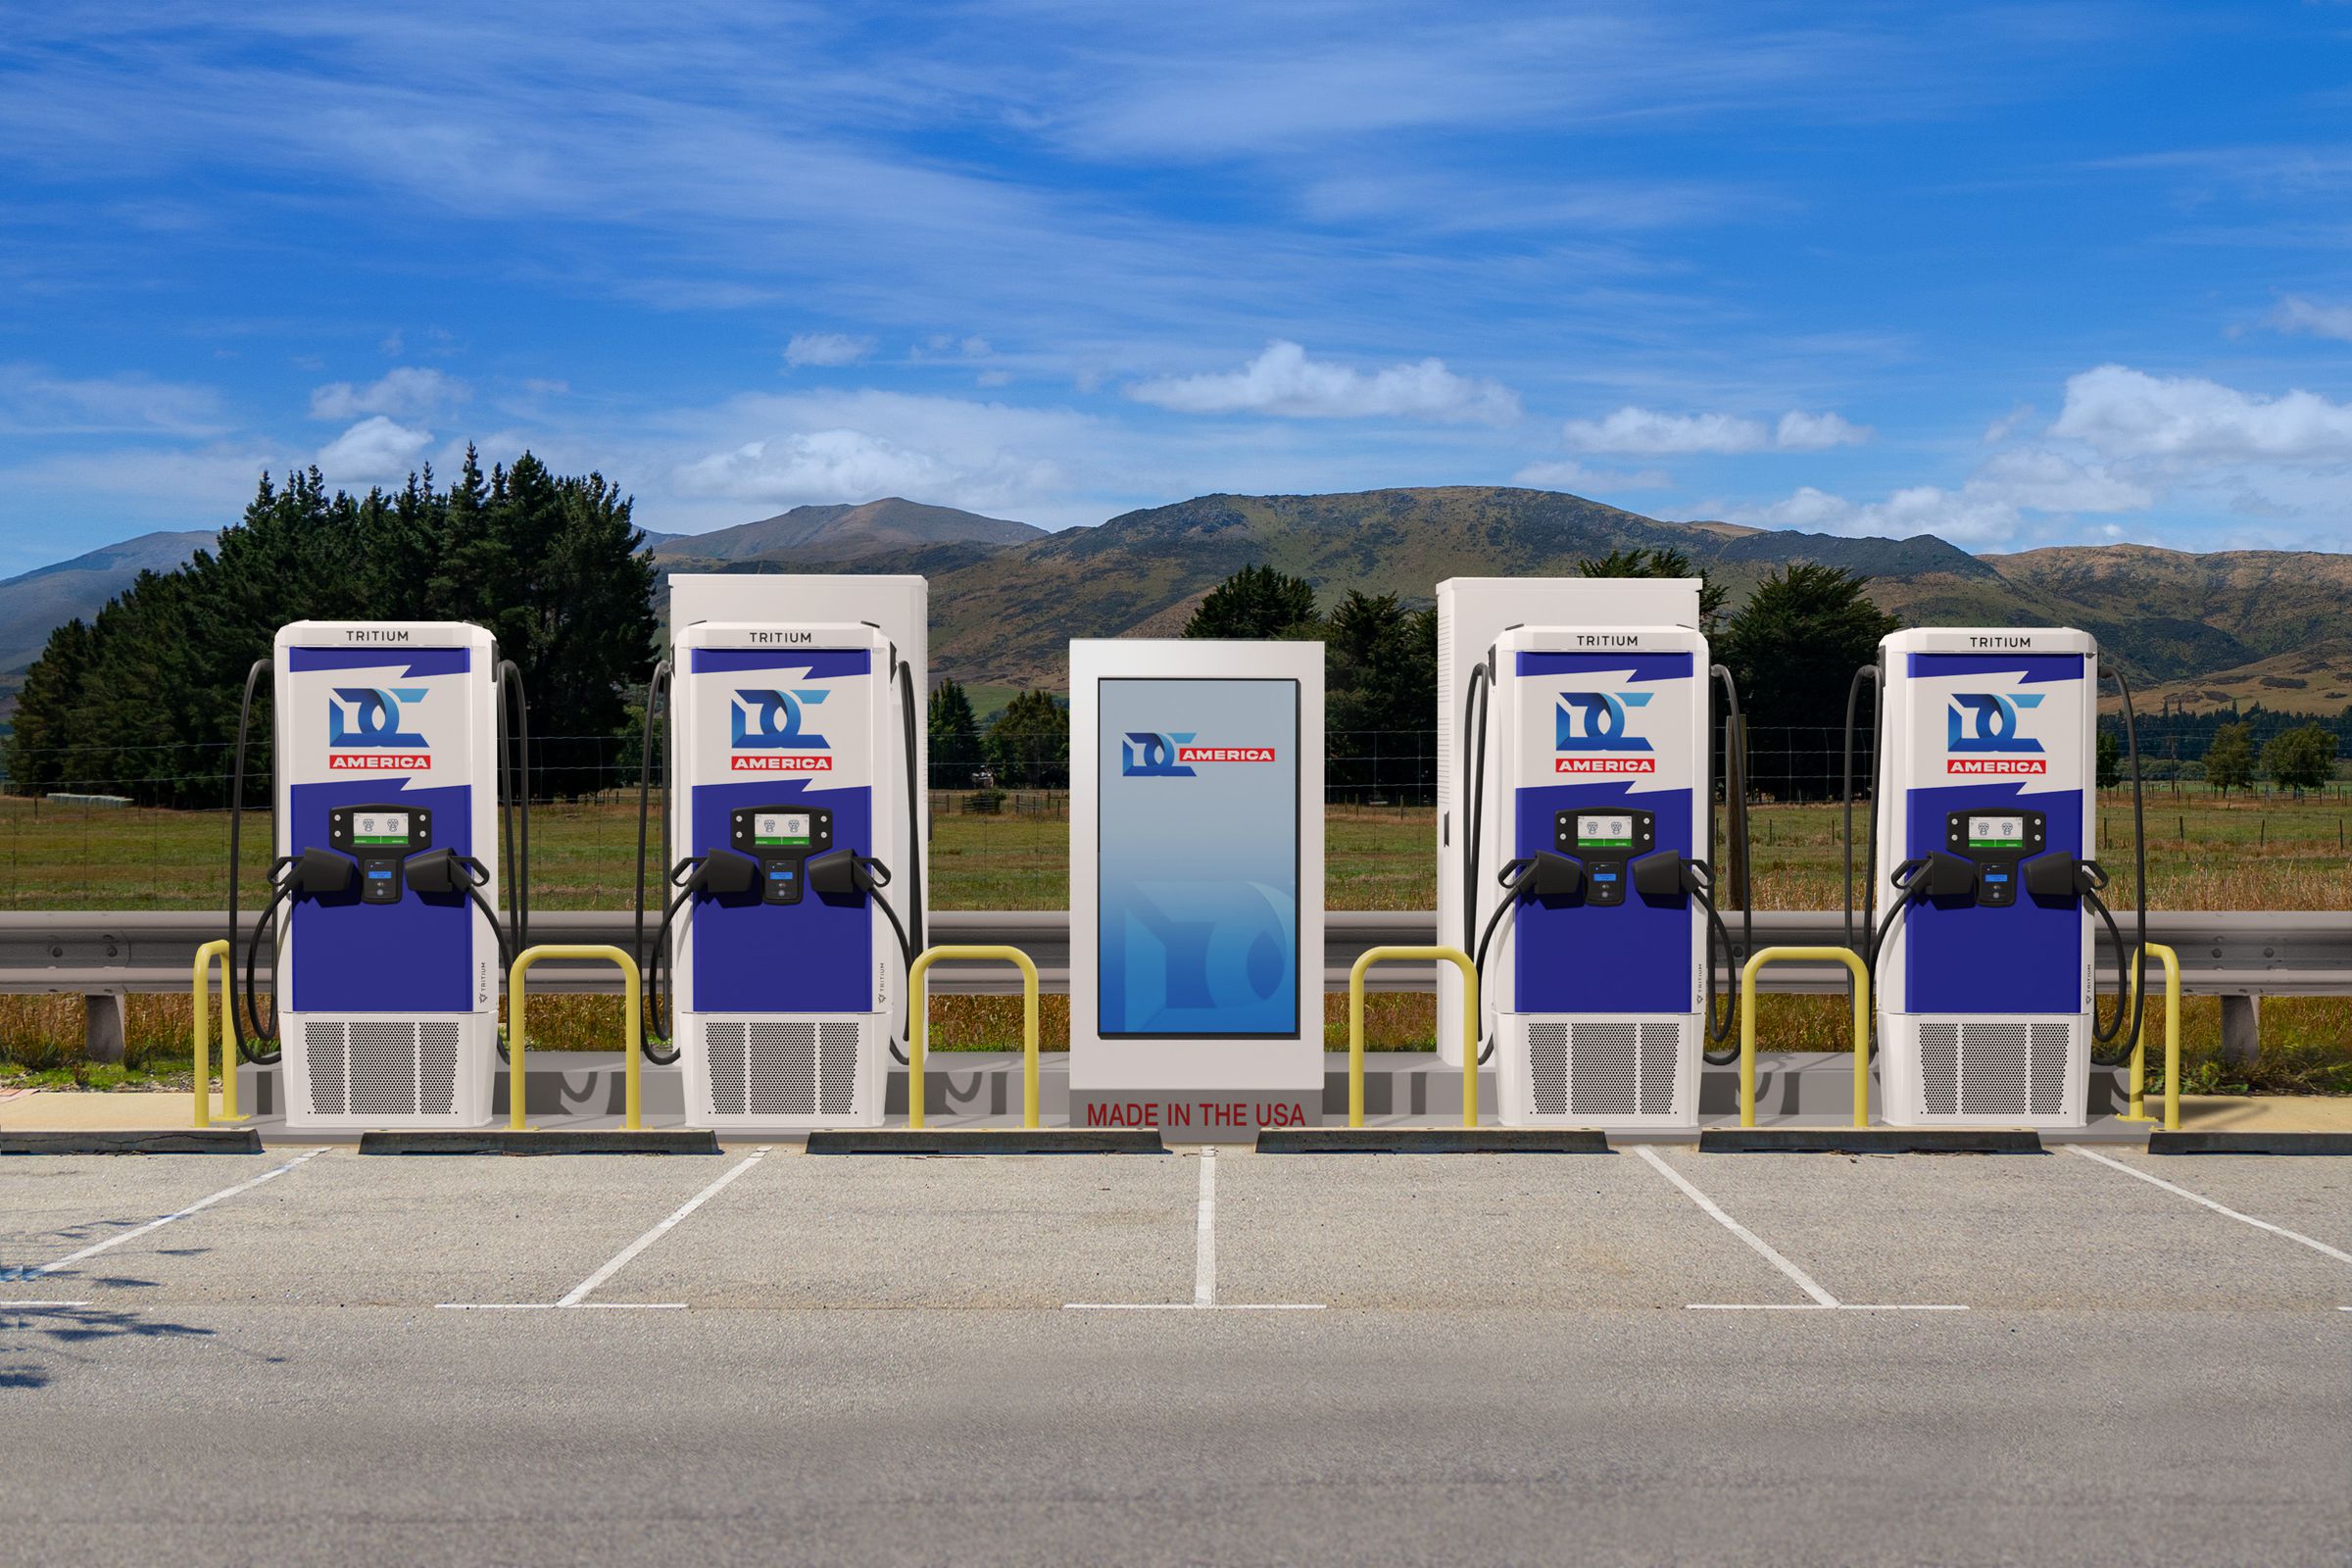 This rendering shows four Tritium charging stations in a line, each with two plugs and cables, two large transformer units behind the units, and a large screen in between two pairs of stations. The background is mountainous, with a partly cloudy sky.